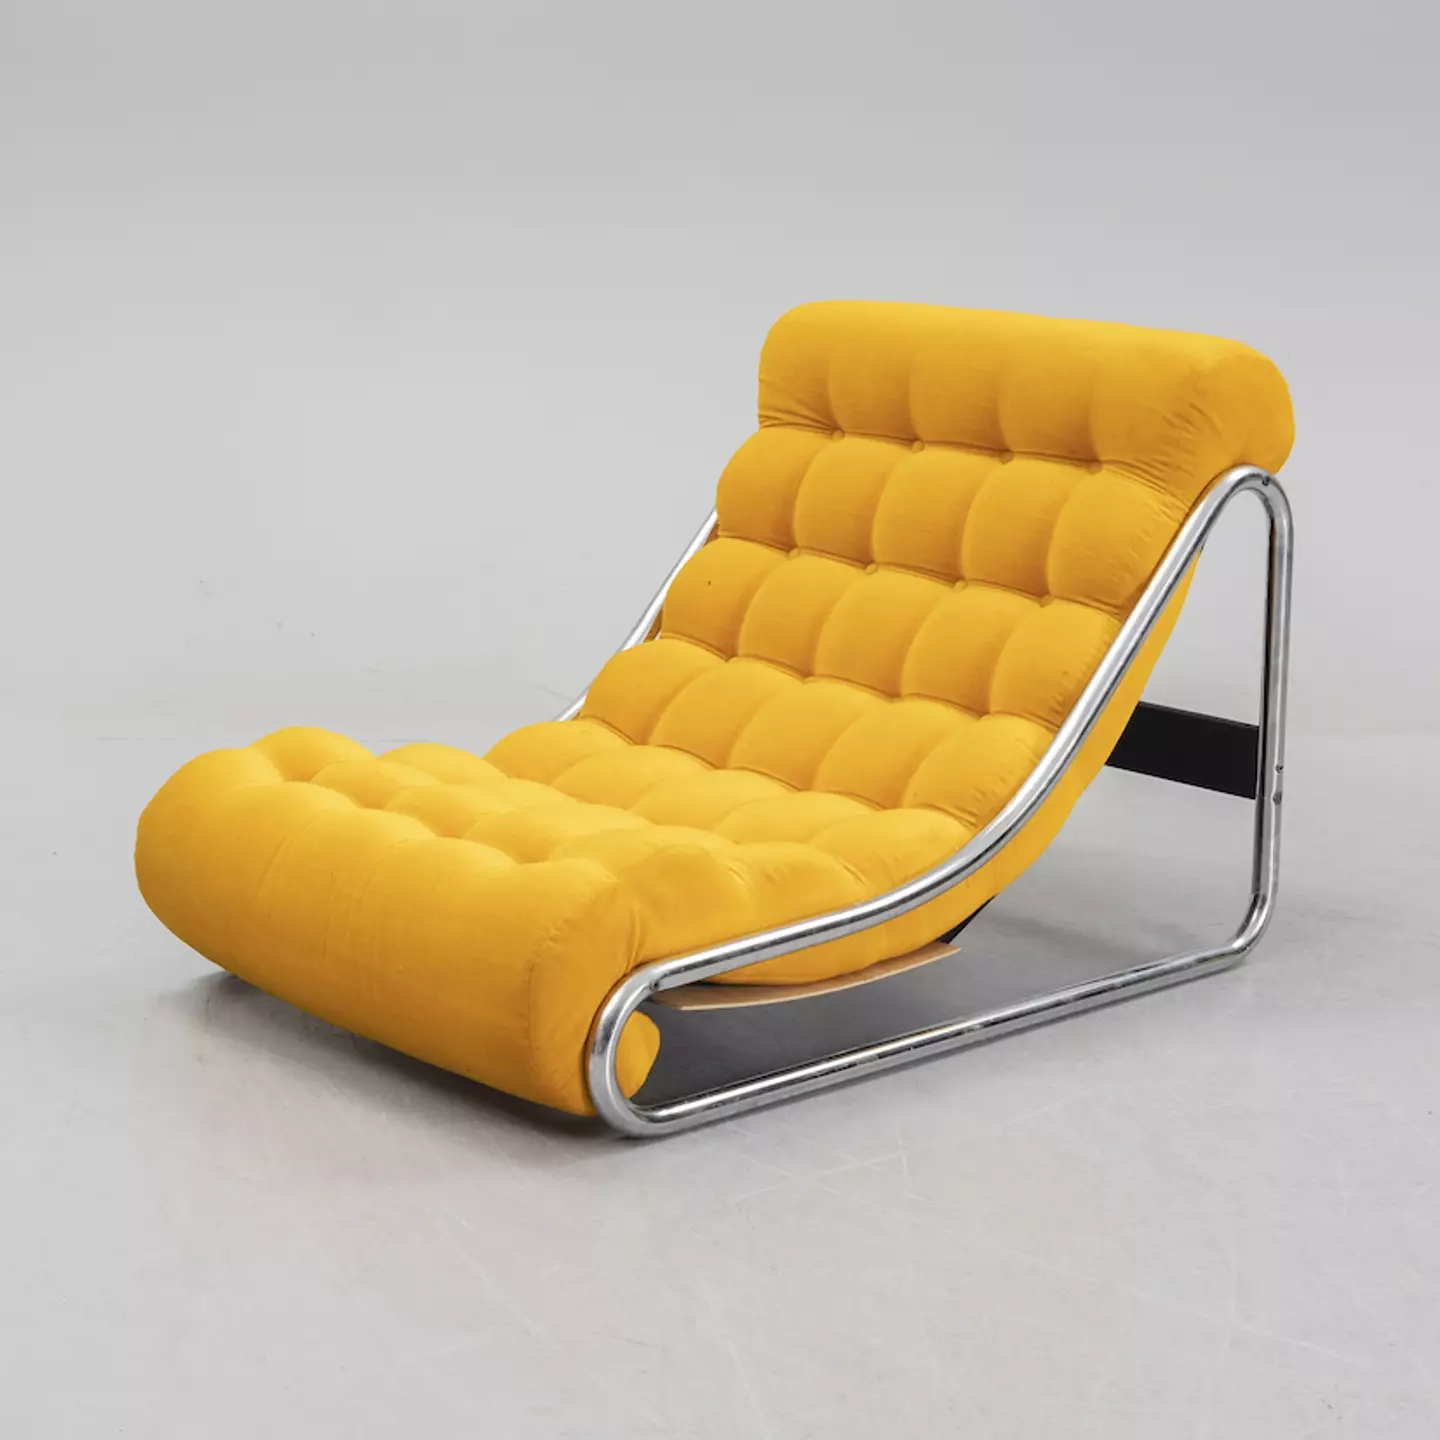 The 'Impala' chair originally sold for £80 and is now worth £2,000.